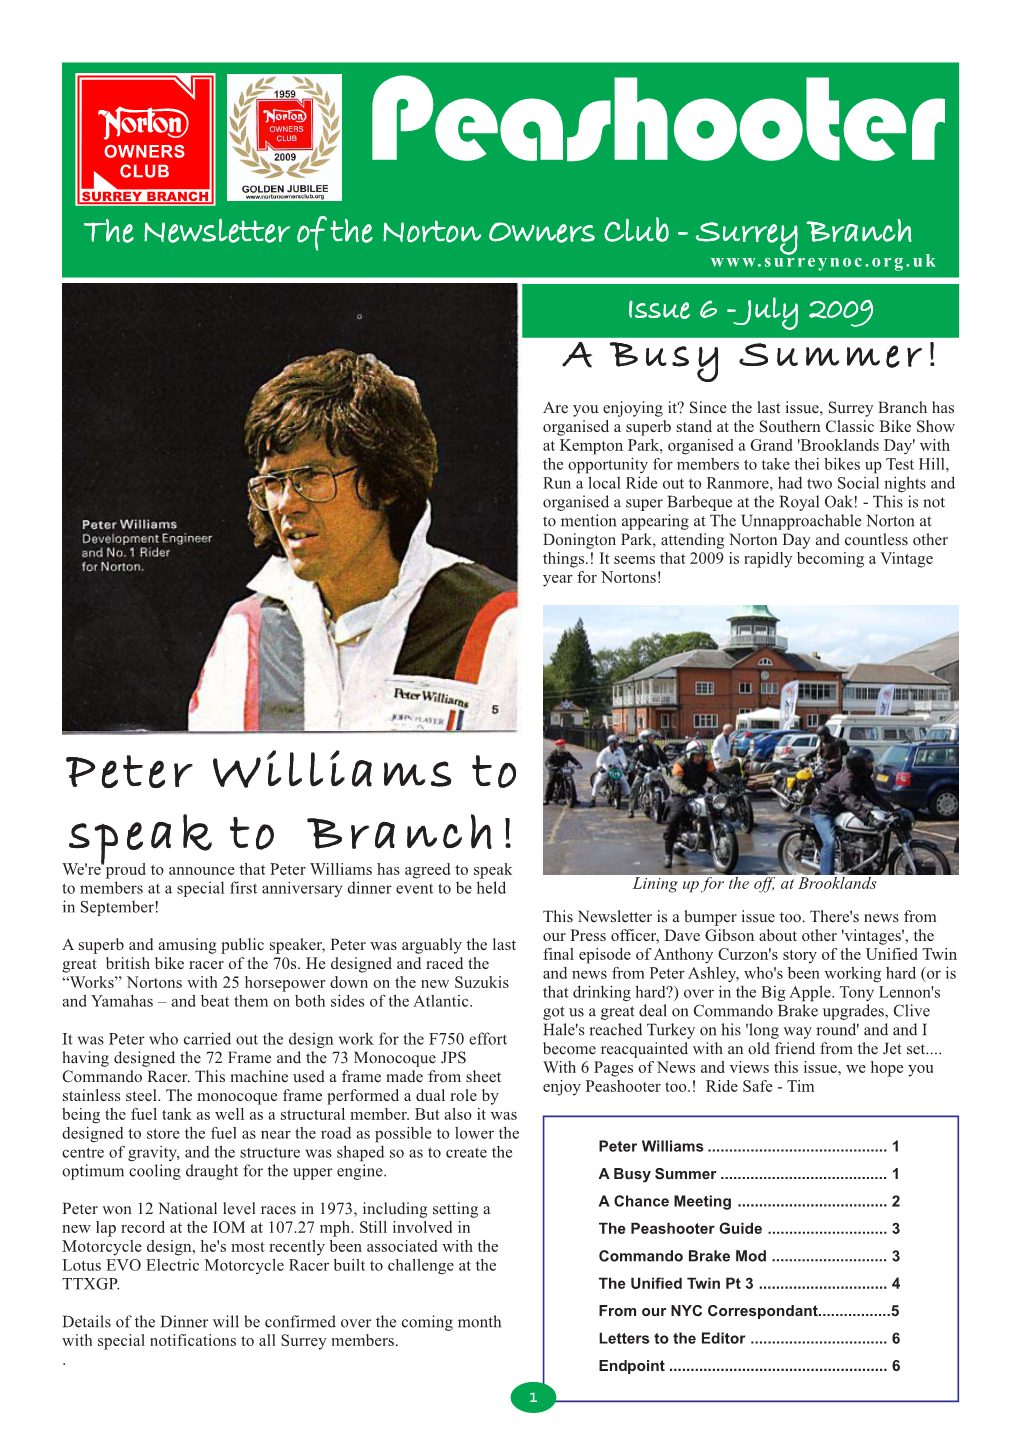 Peter Williams to Speak to Branch!